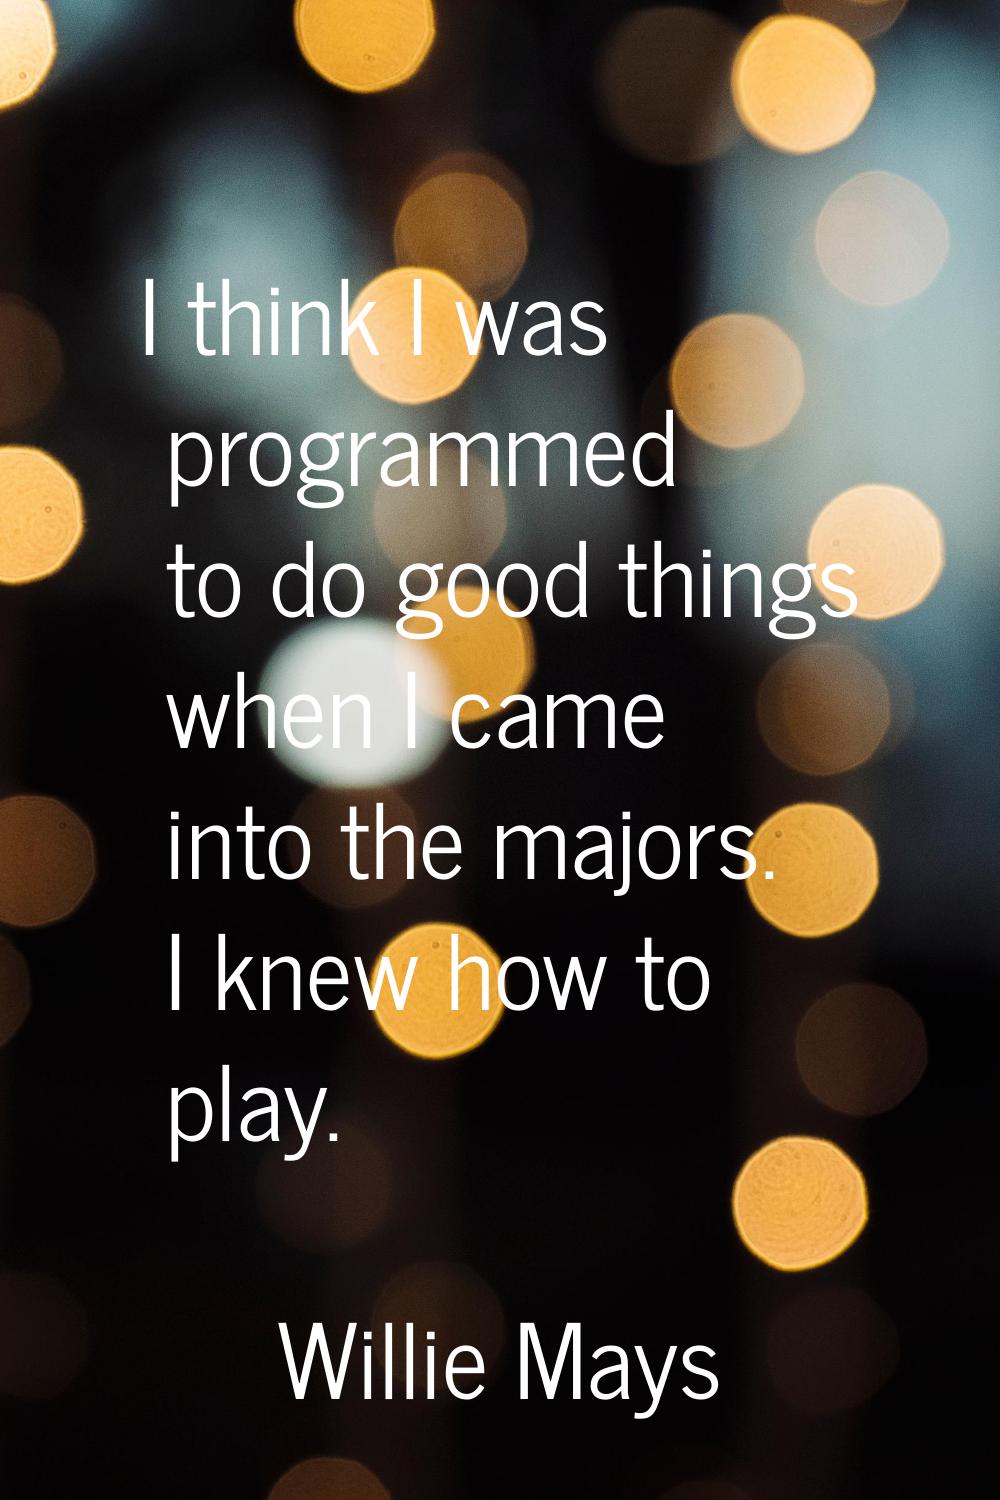 I think I was programmed to do good things when I came into the majors. I knew how to play.